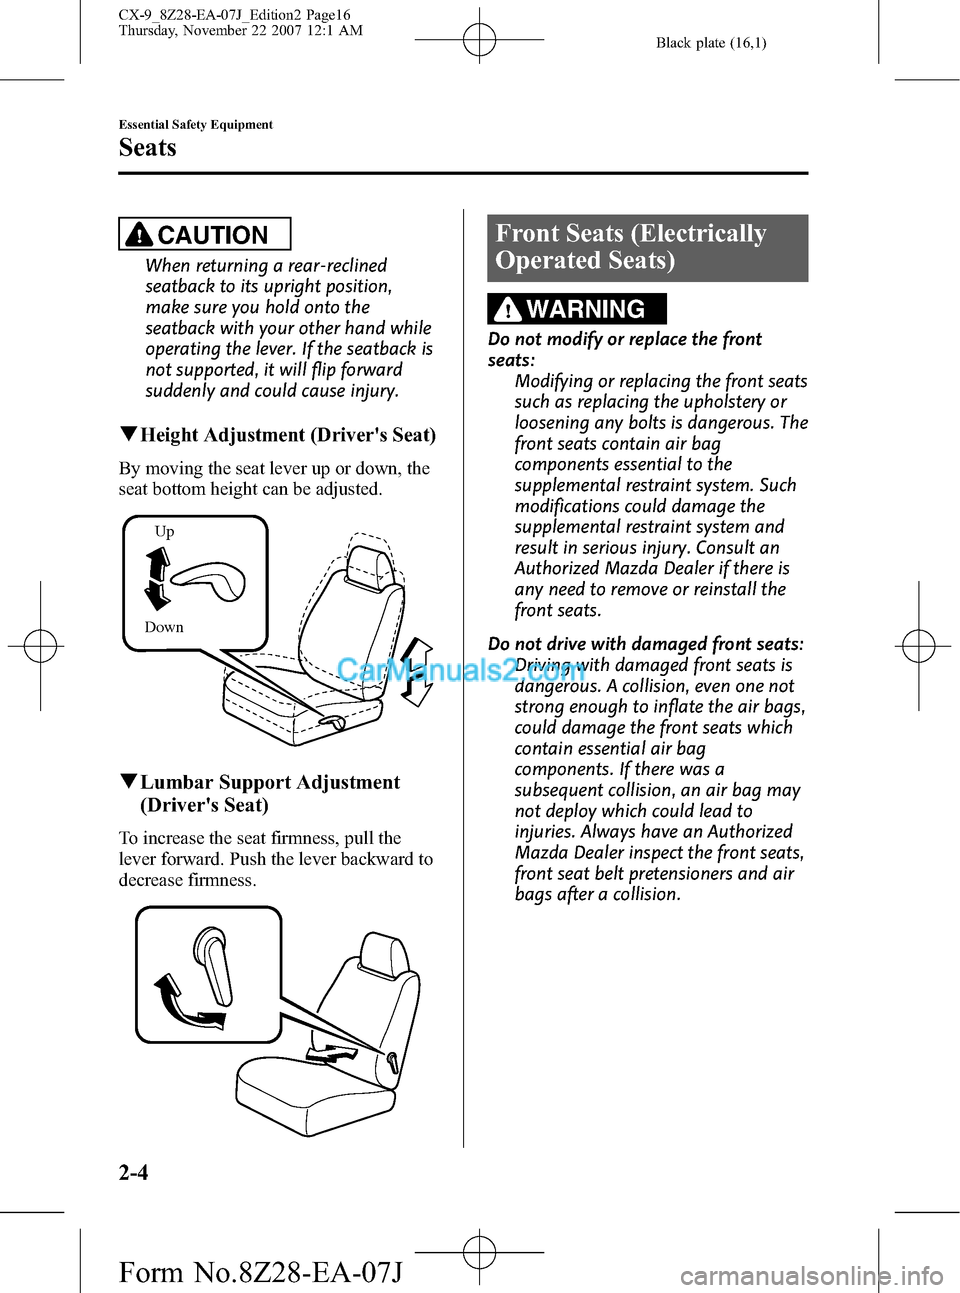 MAZDA MODEL CX-9 2008   (in English) User Guide Black plate (16,1)
CAUTION
When returning a rear-reclined
seatback to its upright position,
make sure you hold onto the
seatback with your other hand while
operating the lever. If the seatback is
not 